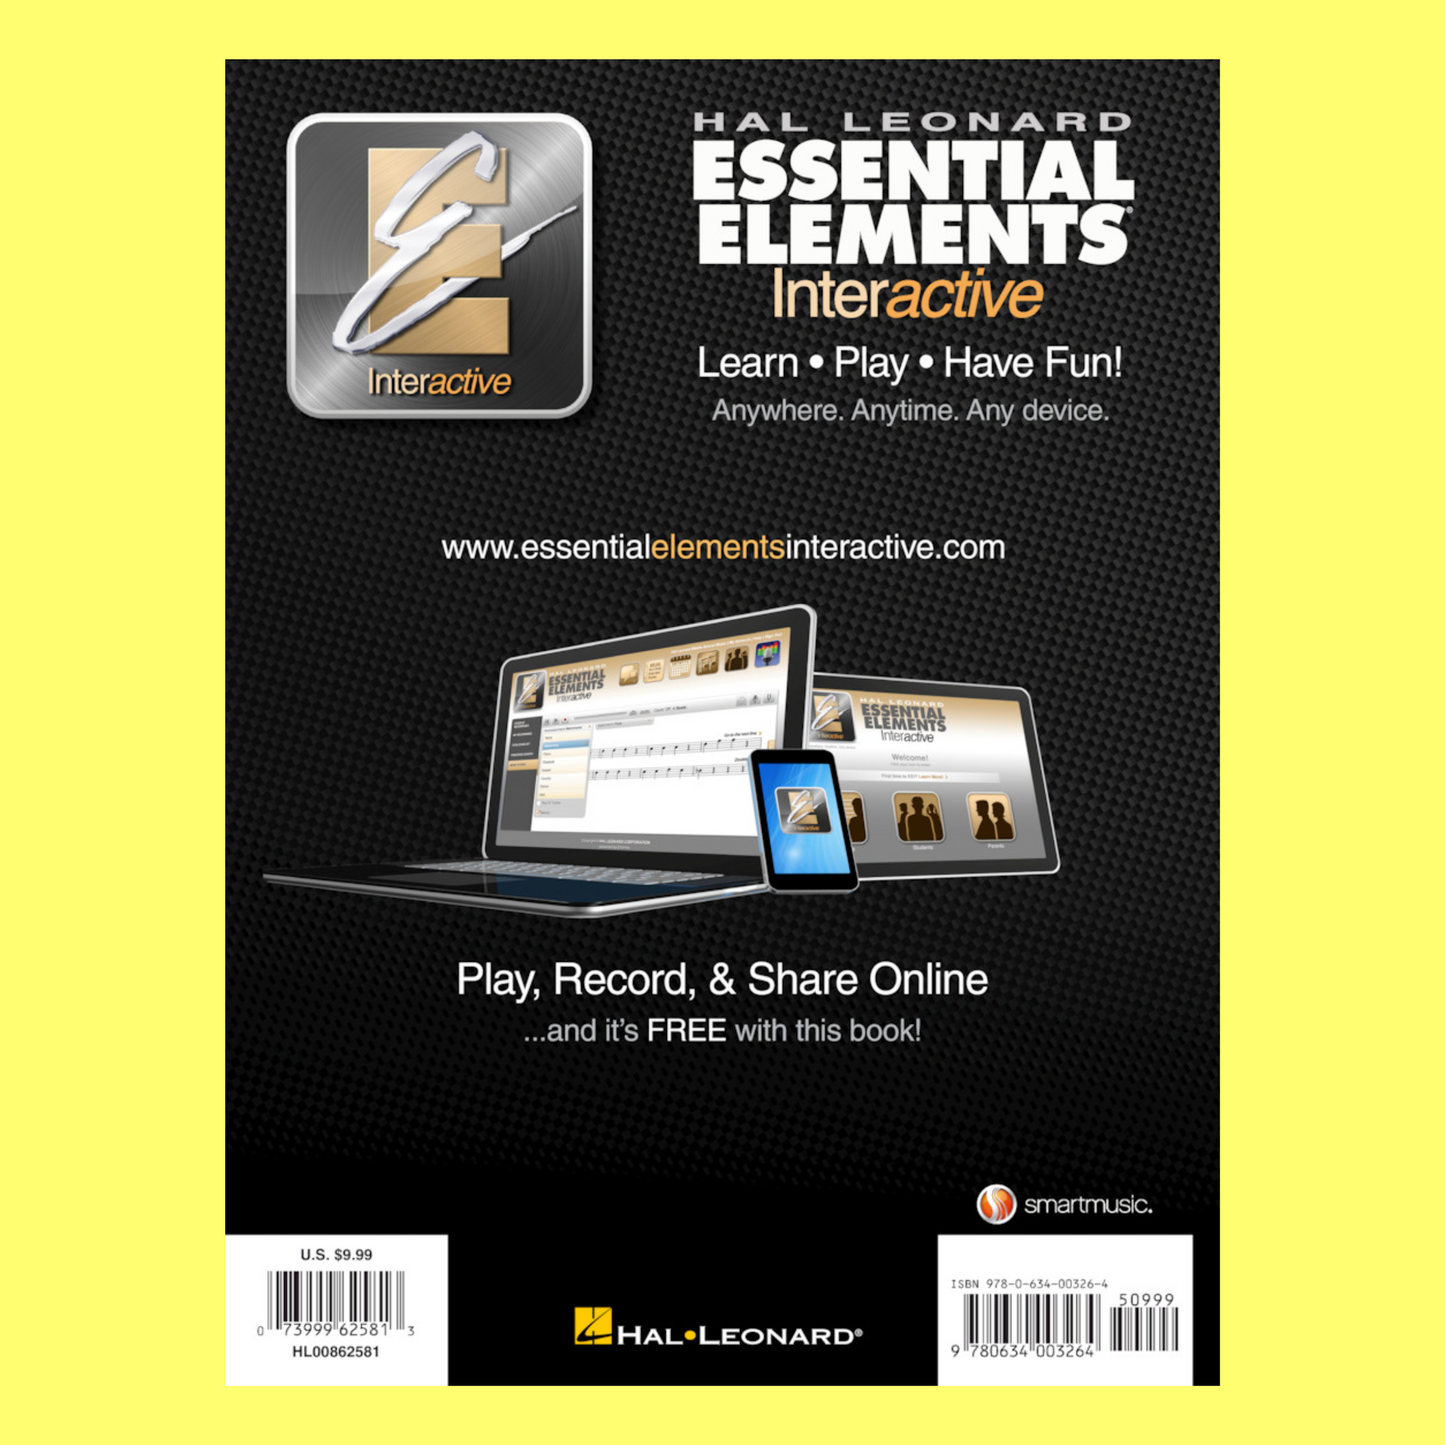 Essential Elements For Band - Electric Bass Book 1 (Book & EEi)